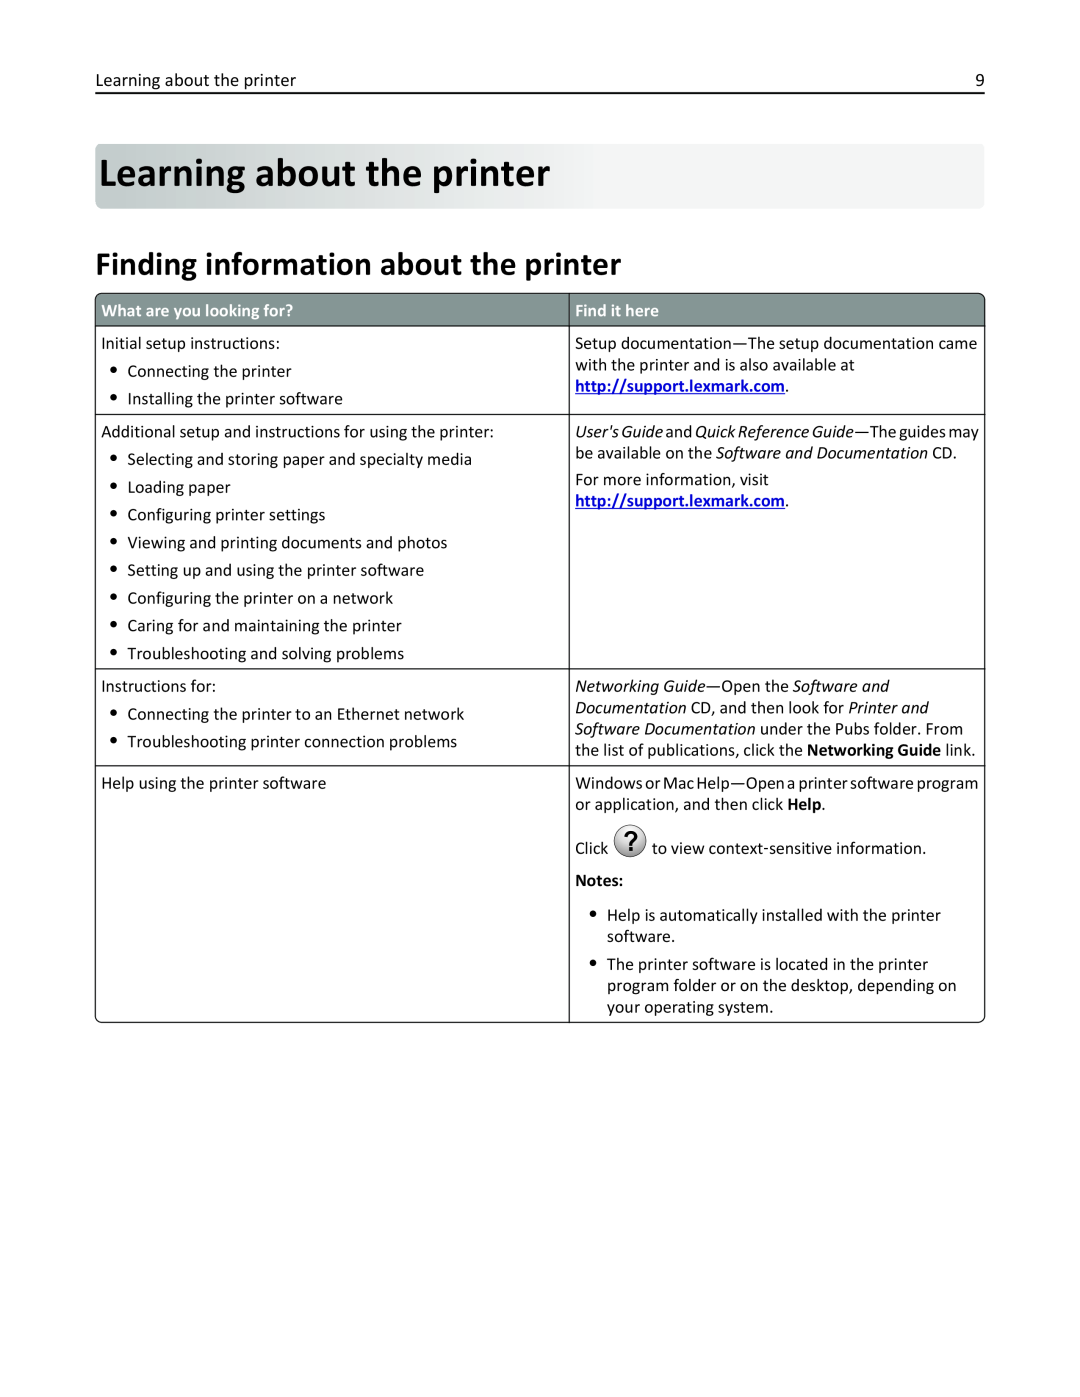 Lexmark 436 manual Learning about the printer, Finding information about the printer, http//support.lexmark.com 